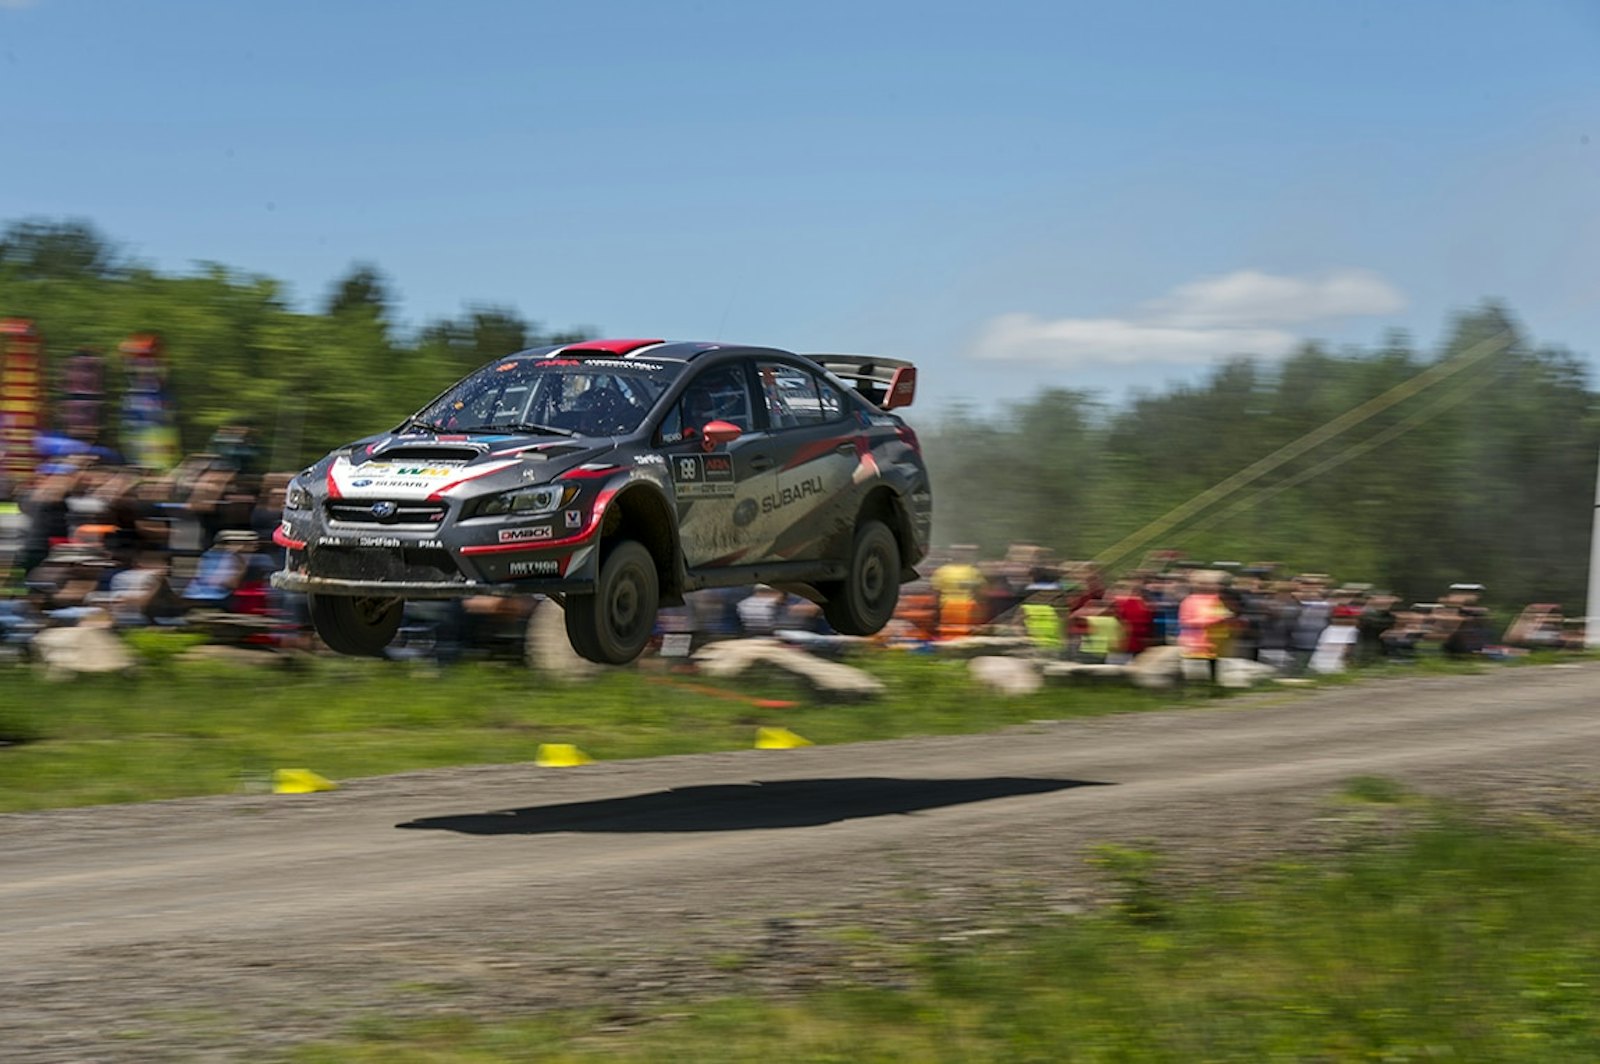 Travis_Pastrana_and_codriver_Robbie_Durant_finished_2nd_overall_at_STPR_2017